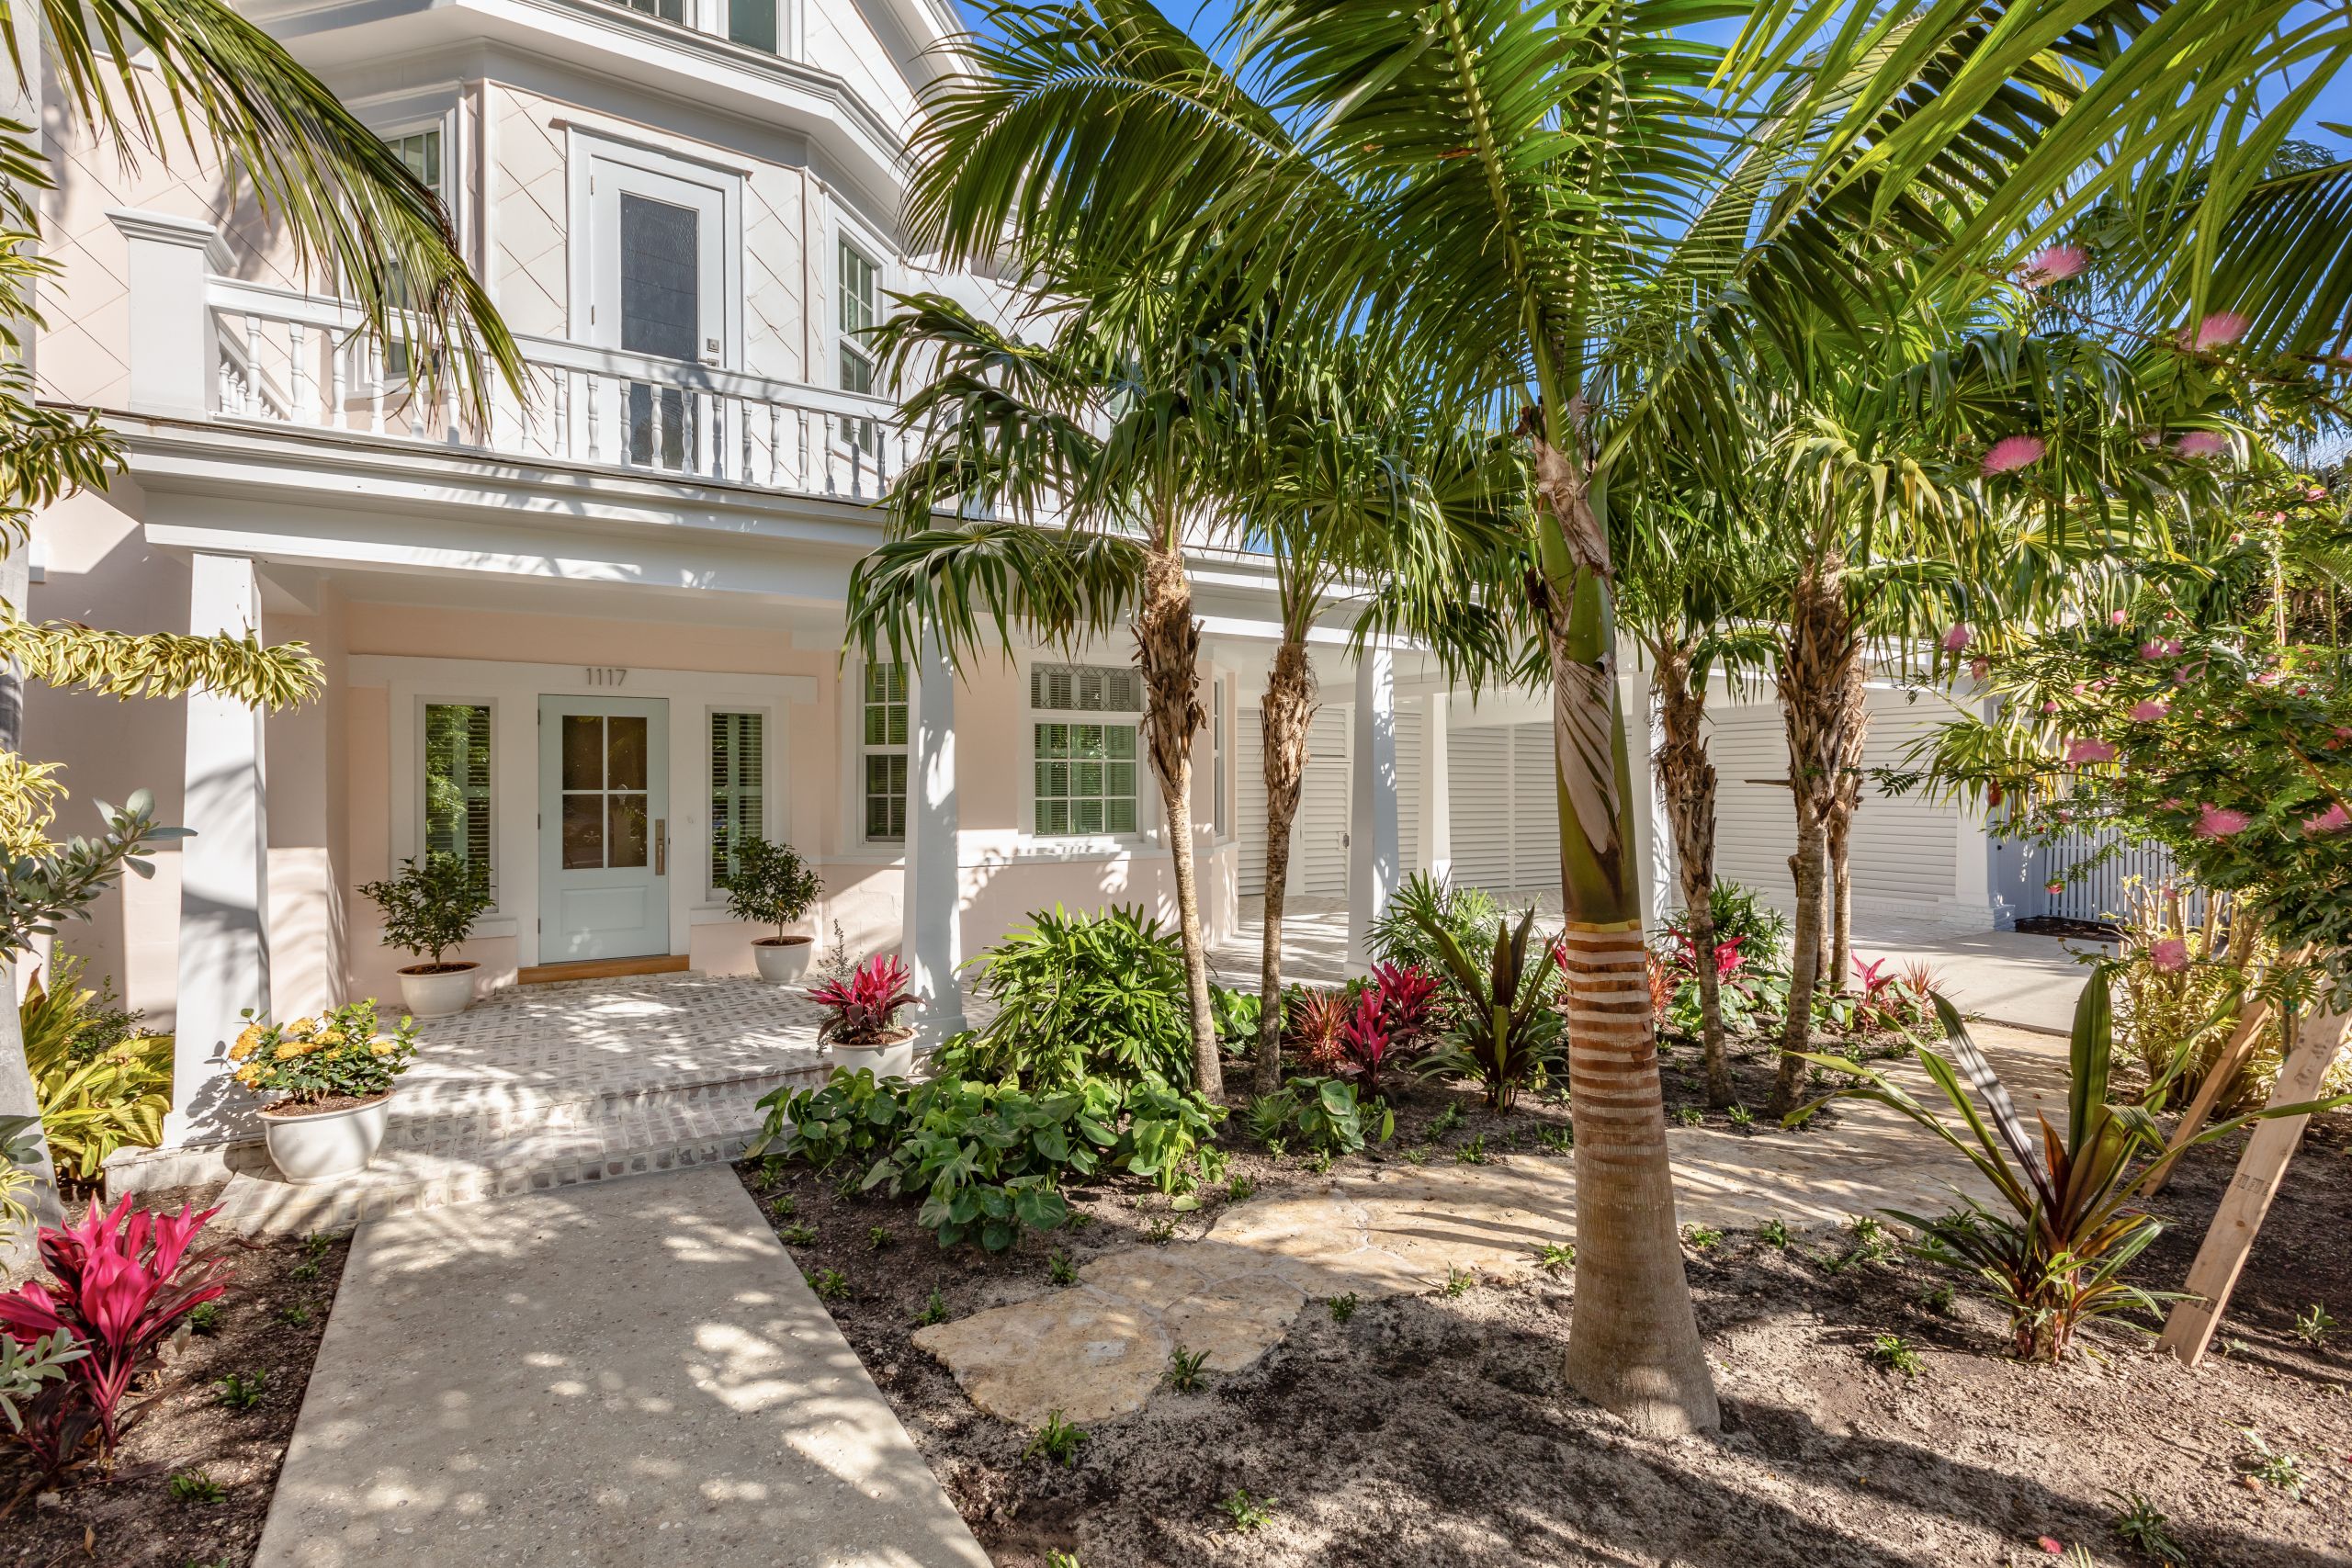 The Best in Key West - 1117 Flagler Ave. - Now $5,140,000